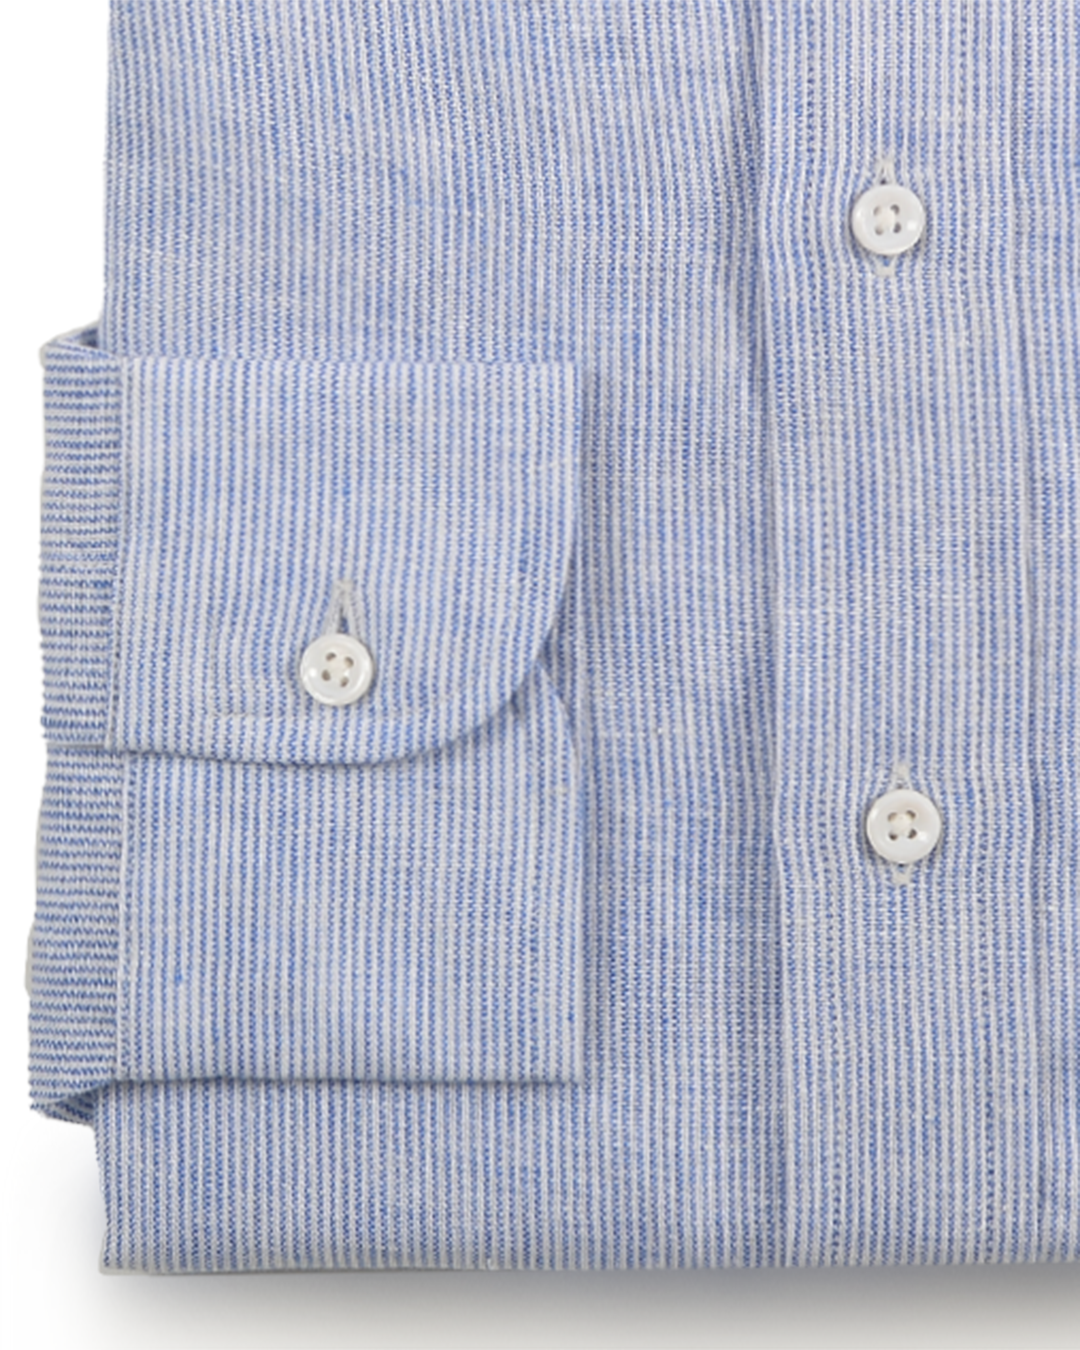 Cuff of the custom linen shirt for men in blue and white dress stripe by Luxire Clothing